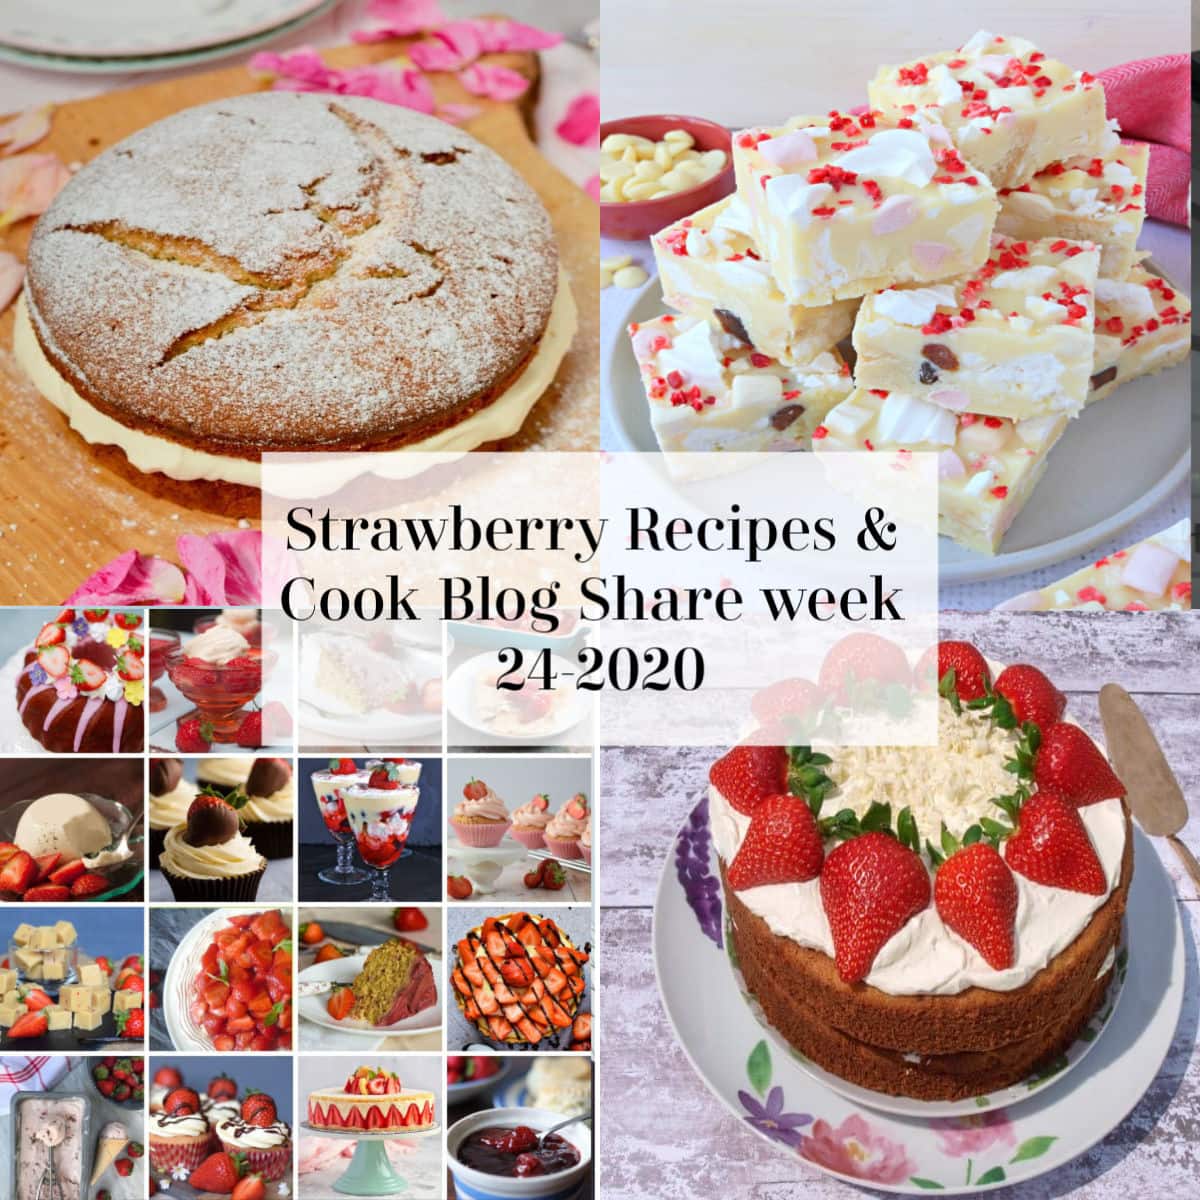 4 pictures of strawberry recipes a ¼ square each with white rectangle in the middle saying strawberry recipes, cookblog share week 24 2020